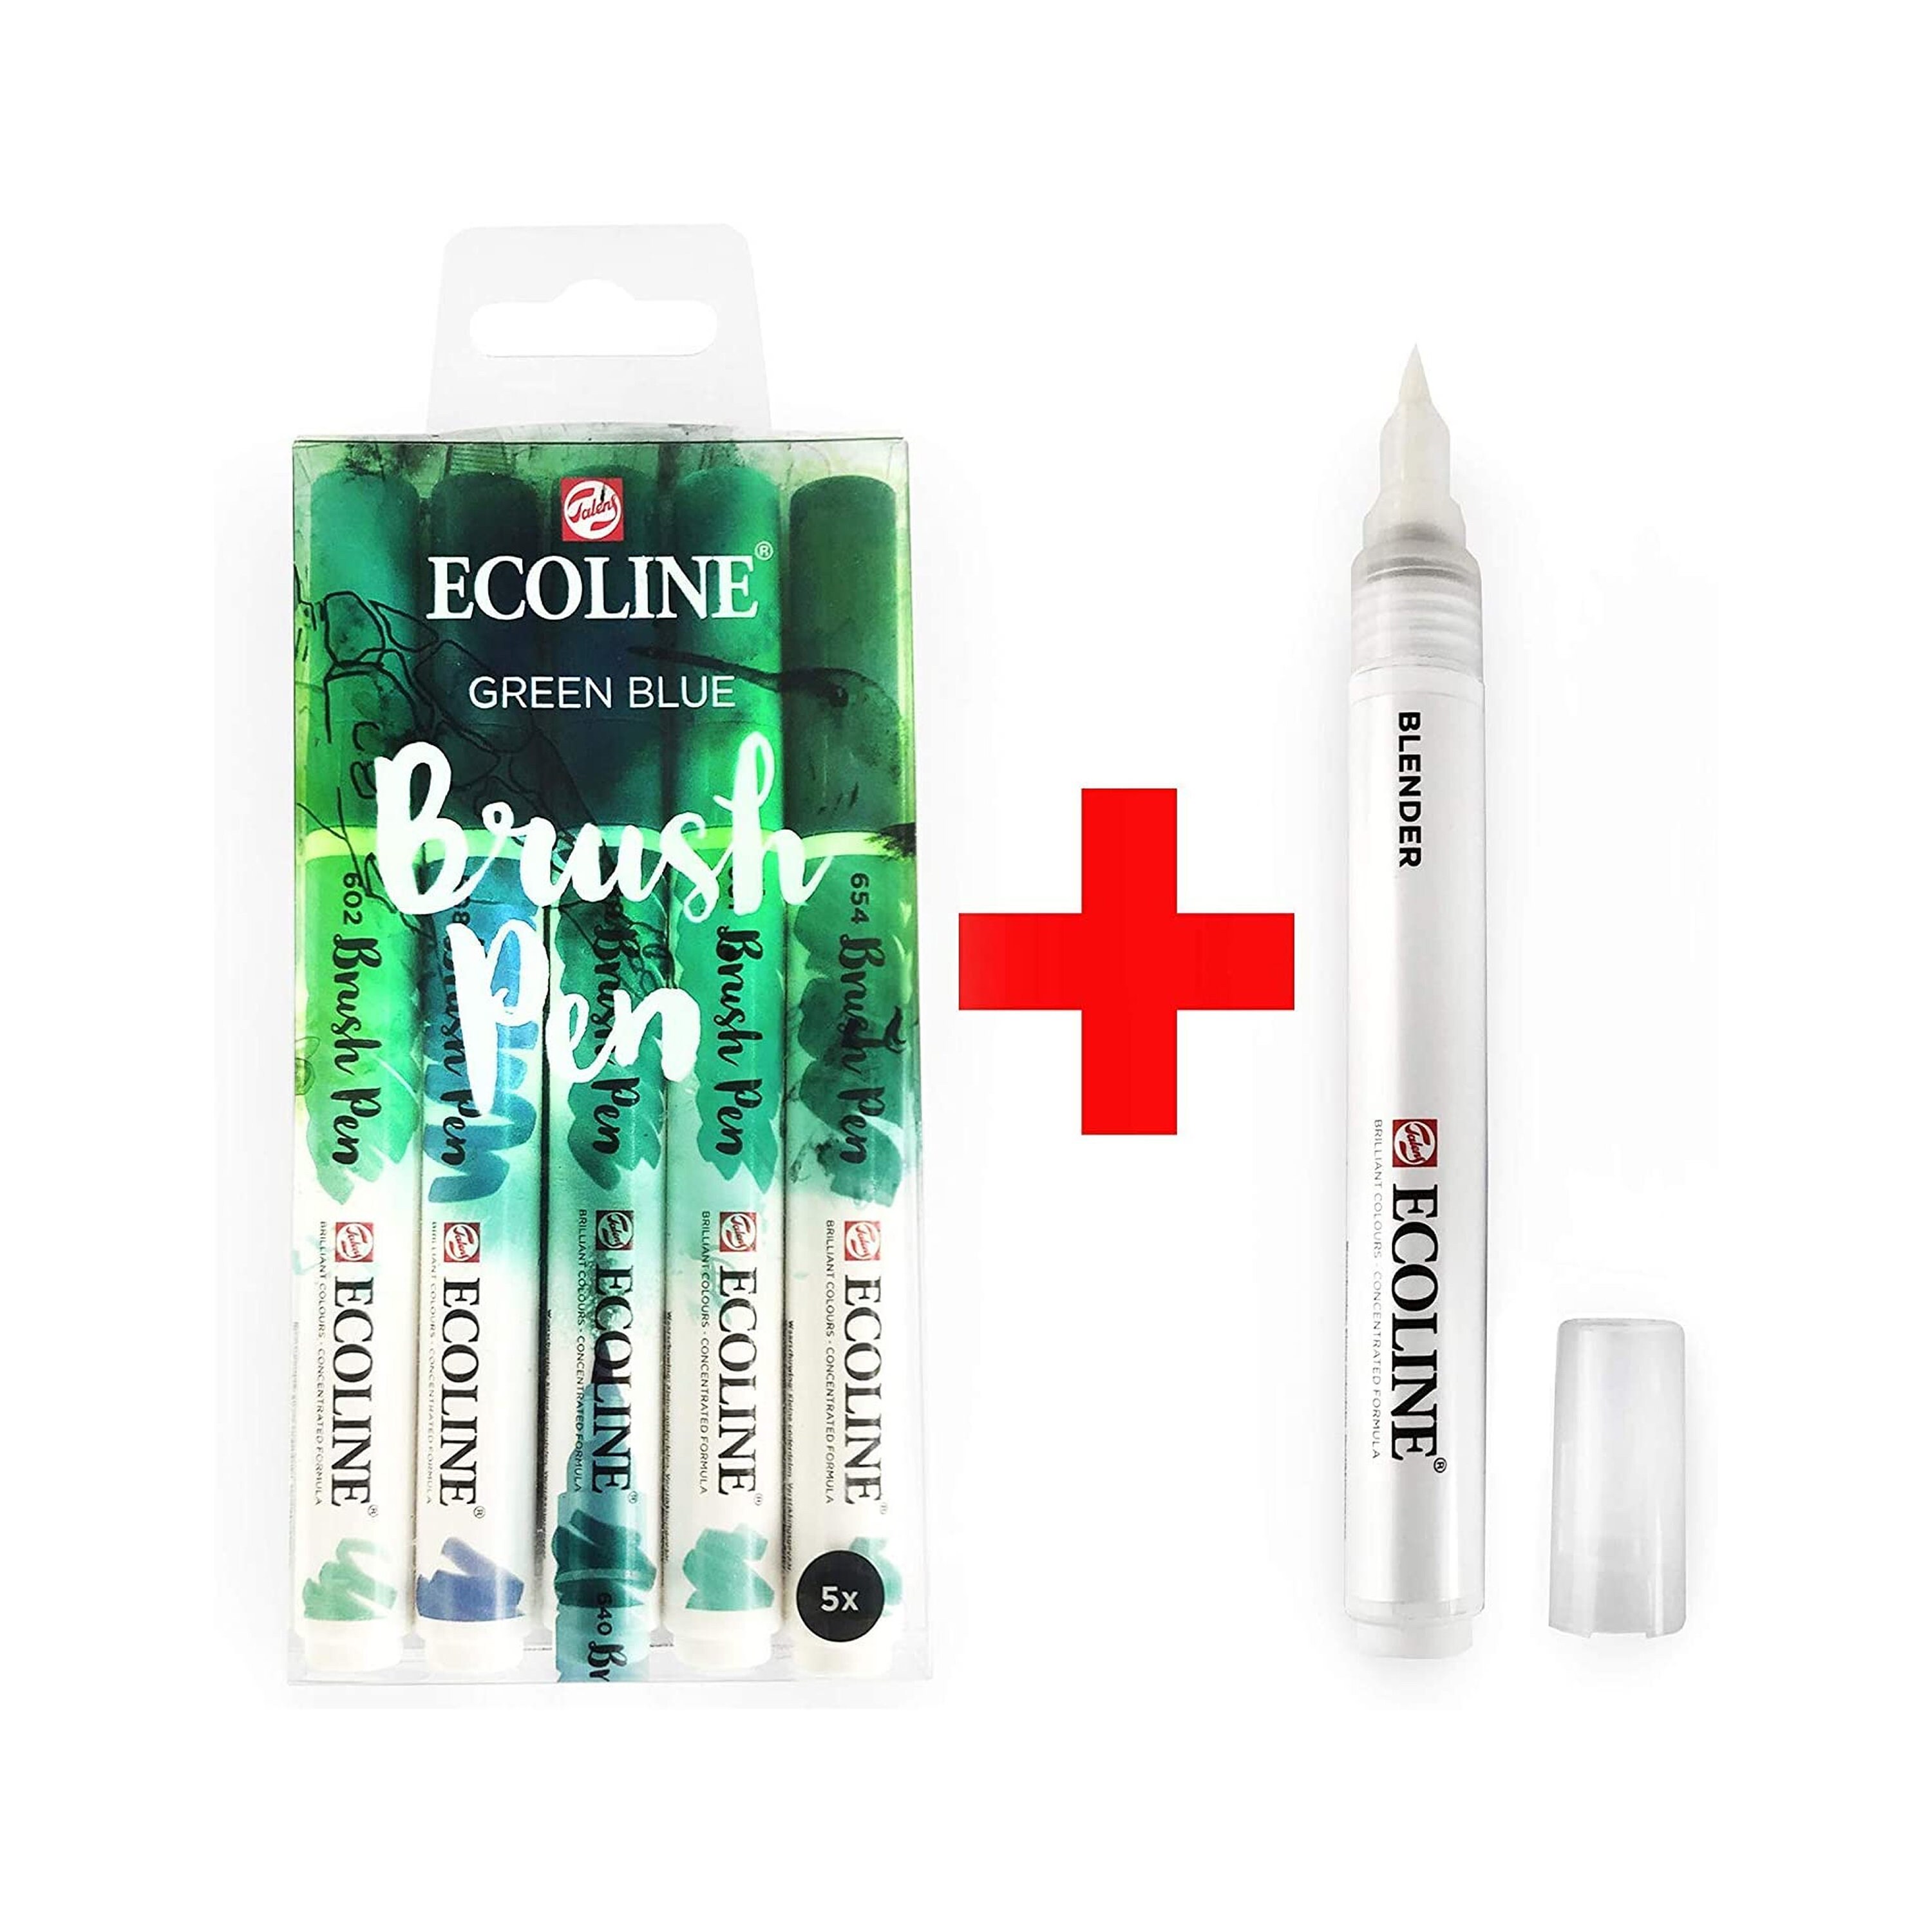 Royal Talens Ecoline Liquid Watercolour Drawing Painting Brush Pens Set of  15 Assorted Colours in Wallet Blender Pen 